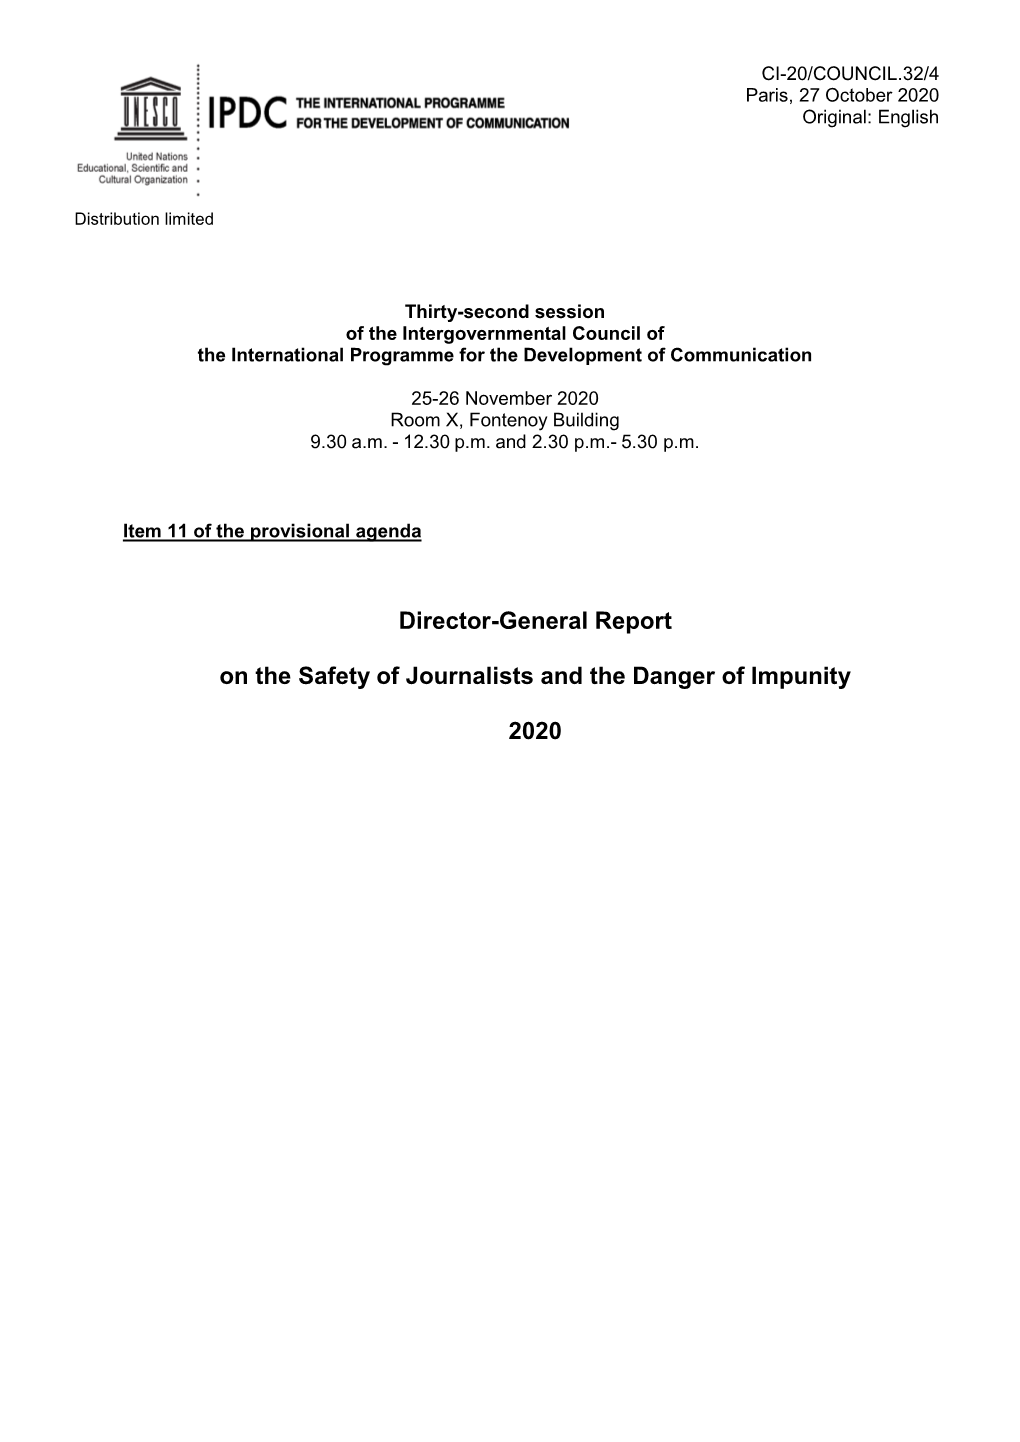 Director-General Report on the Safety of Journalists and the Danger